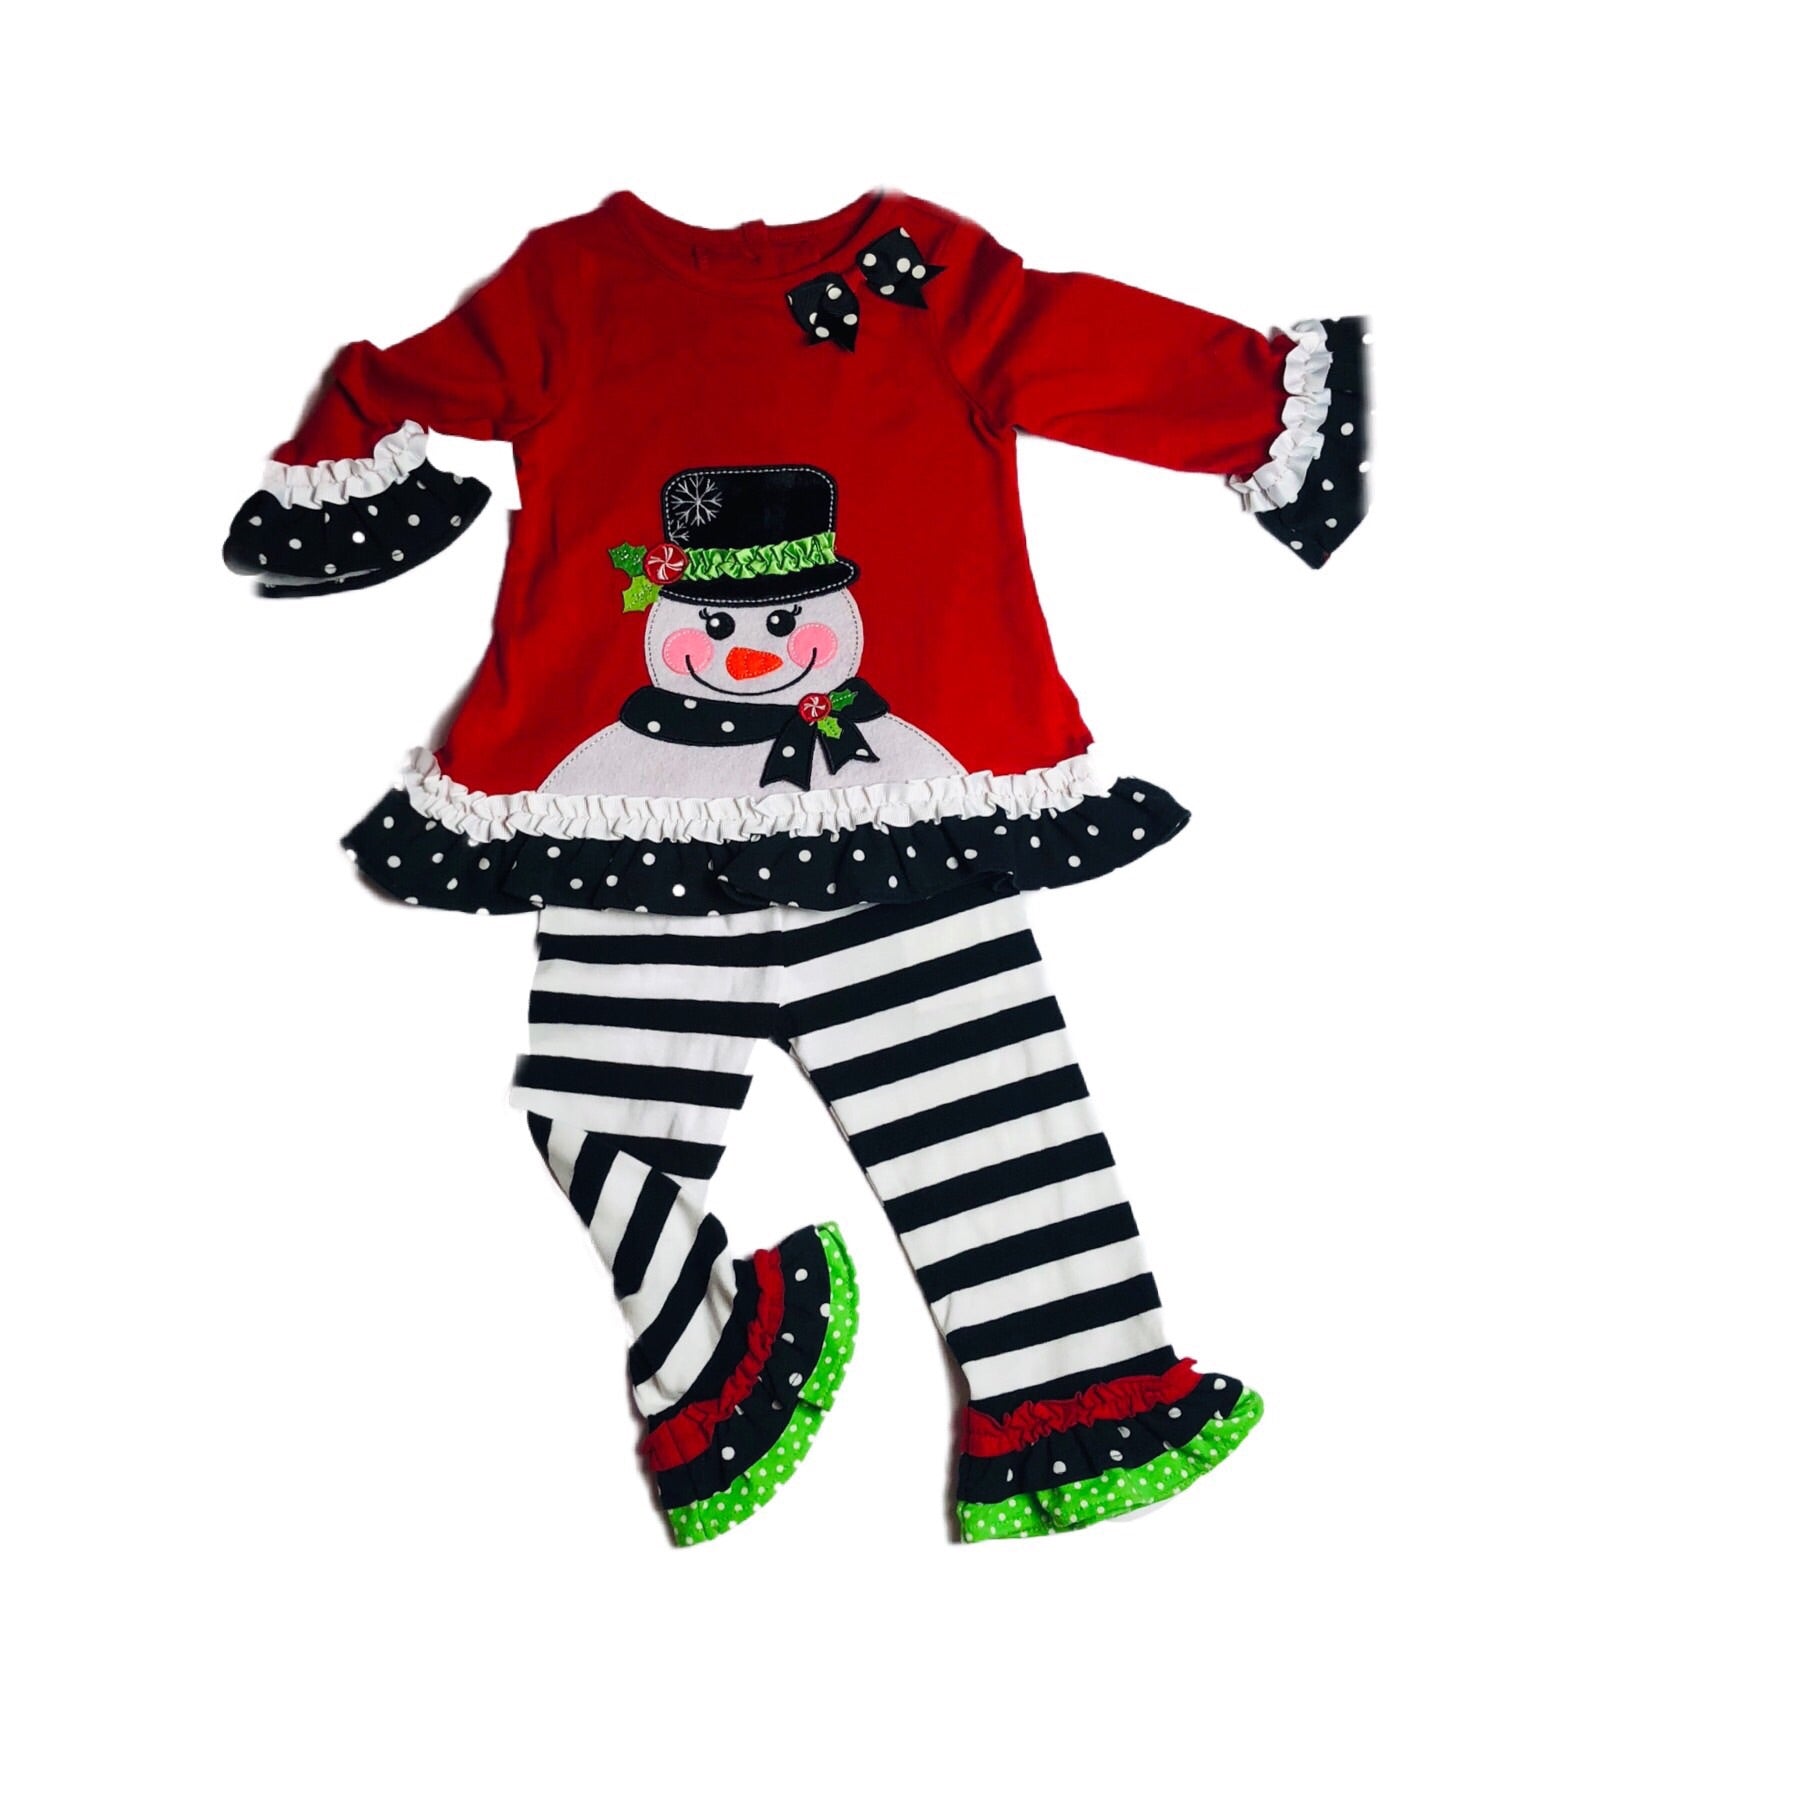 Snowman shirt and ruffle pants outfit